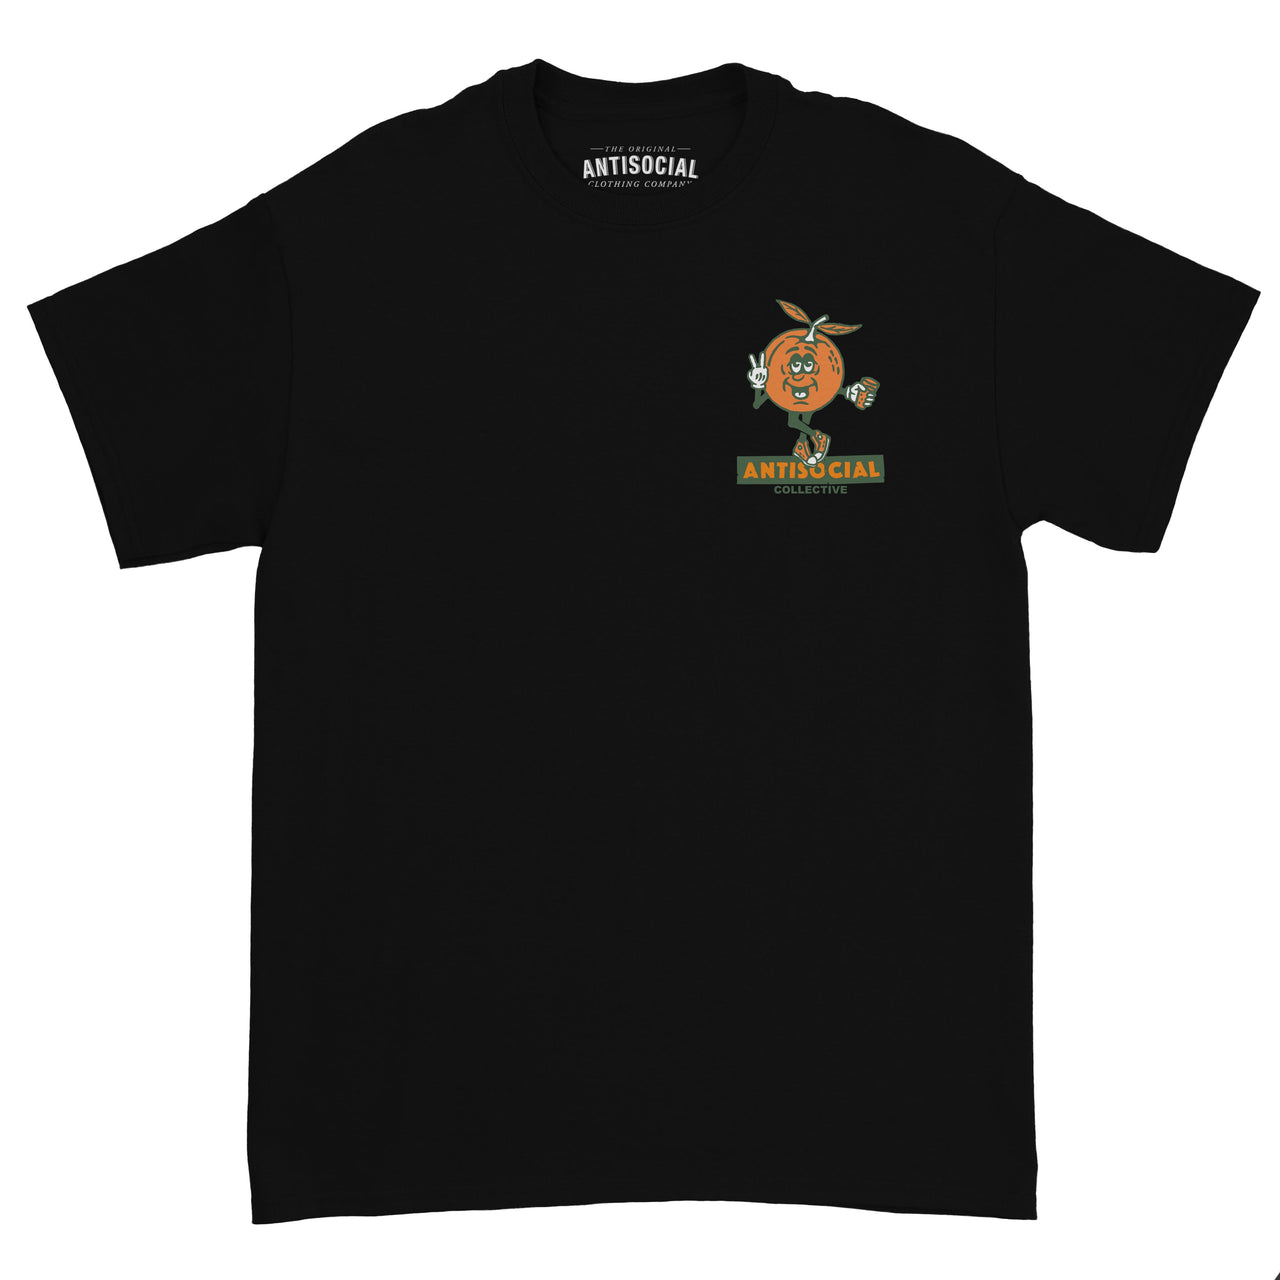 ANTISOCIAL - LOCAL PRODUCE S/S TEE - BLACK - Antisocial Collective